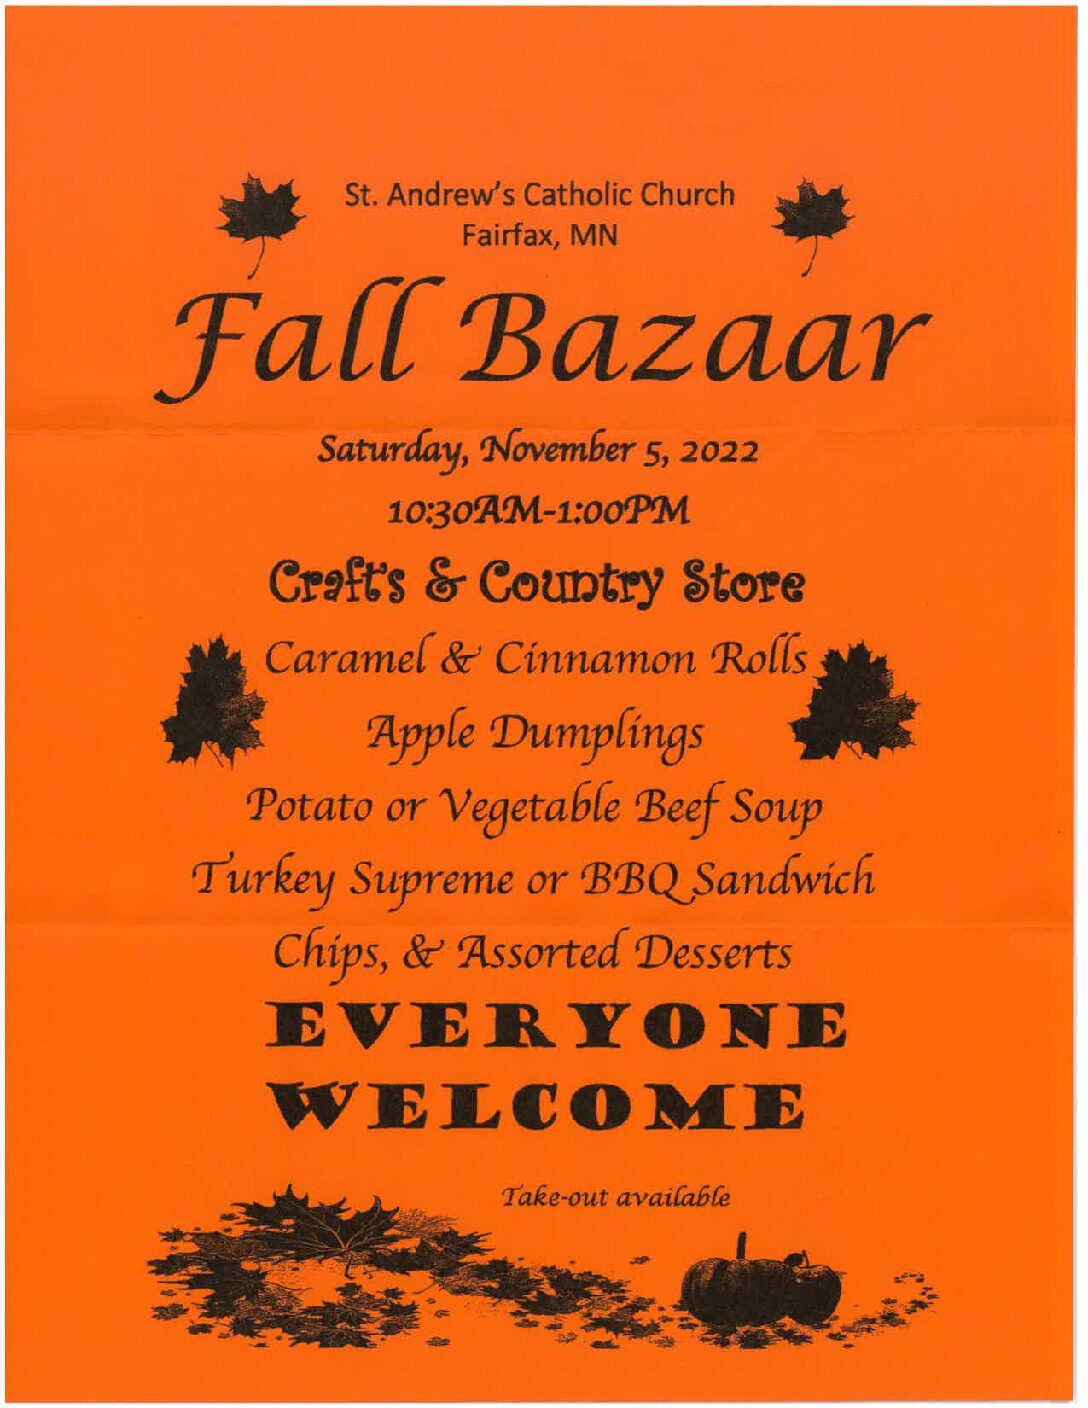 <h1 class="tribe-events-single-event-title">St. Andrew’s Catholic Church in Fairfax Fall Bazaar</h1>